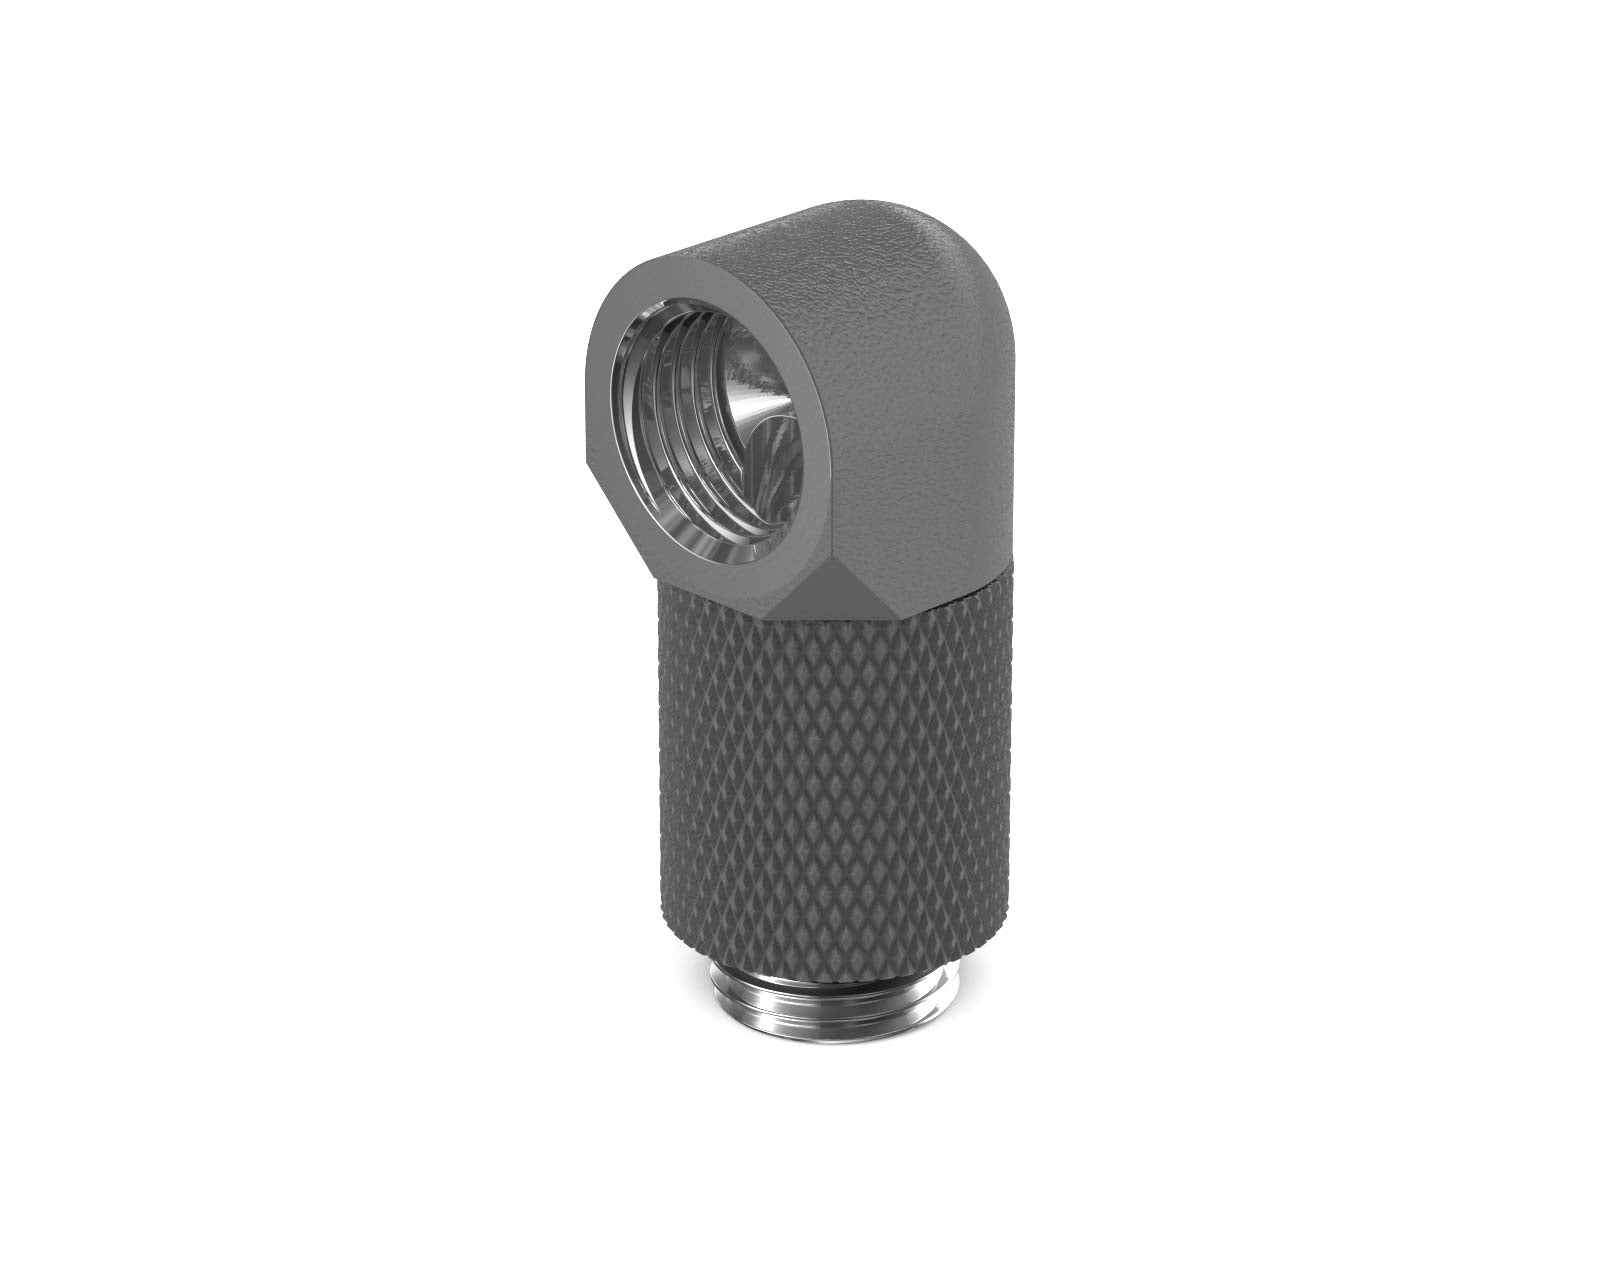 PrimoChill Male to Female G 1/4in. 90 Degree SX Rotary 20mm Extension Elbow Fitting - PrimoChill - KEEPING IT COOL TX Matte Gun Metal